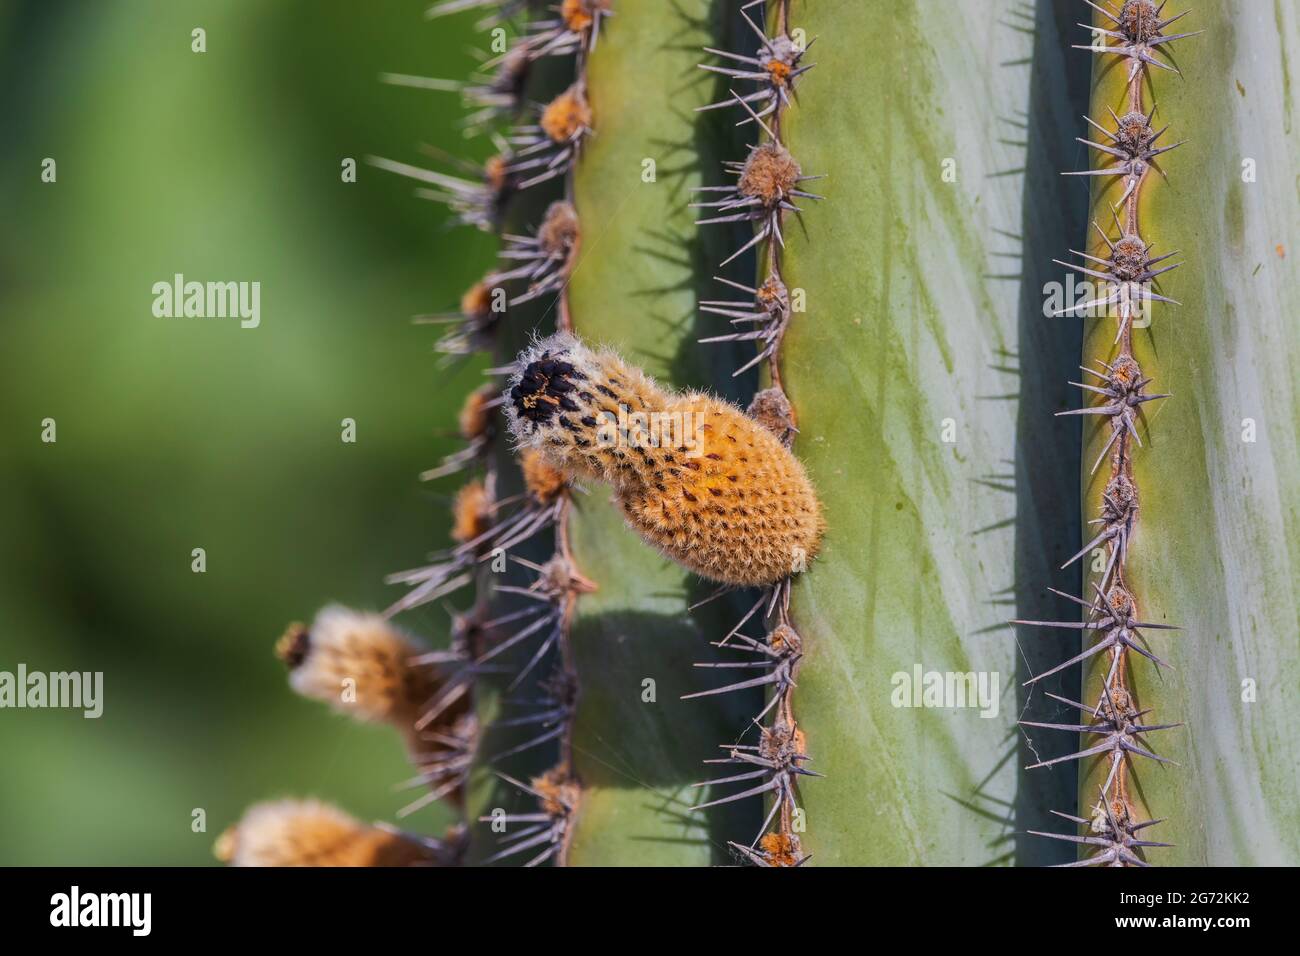 Indian prickly pear fruits. Family of cactus Stock Photo